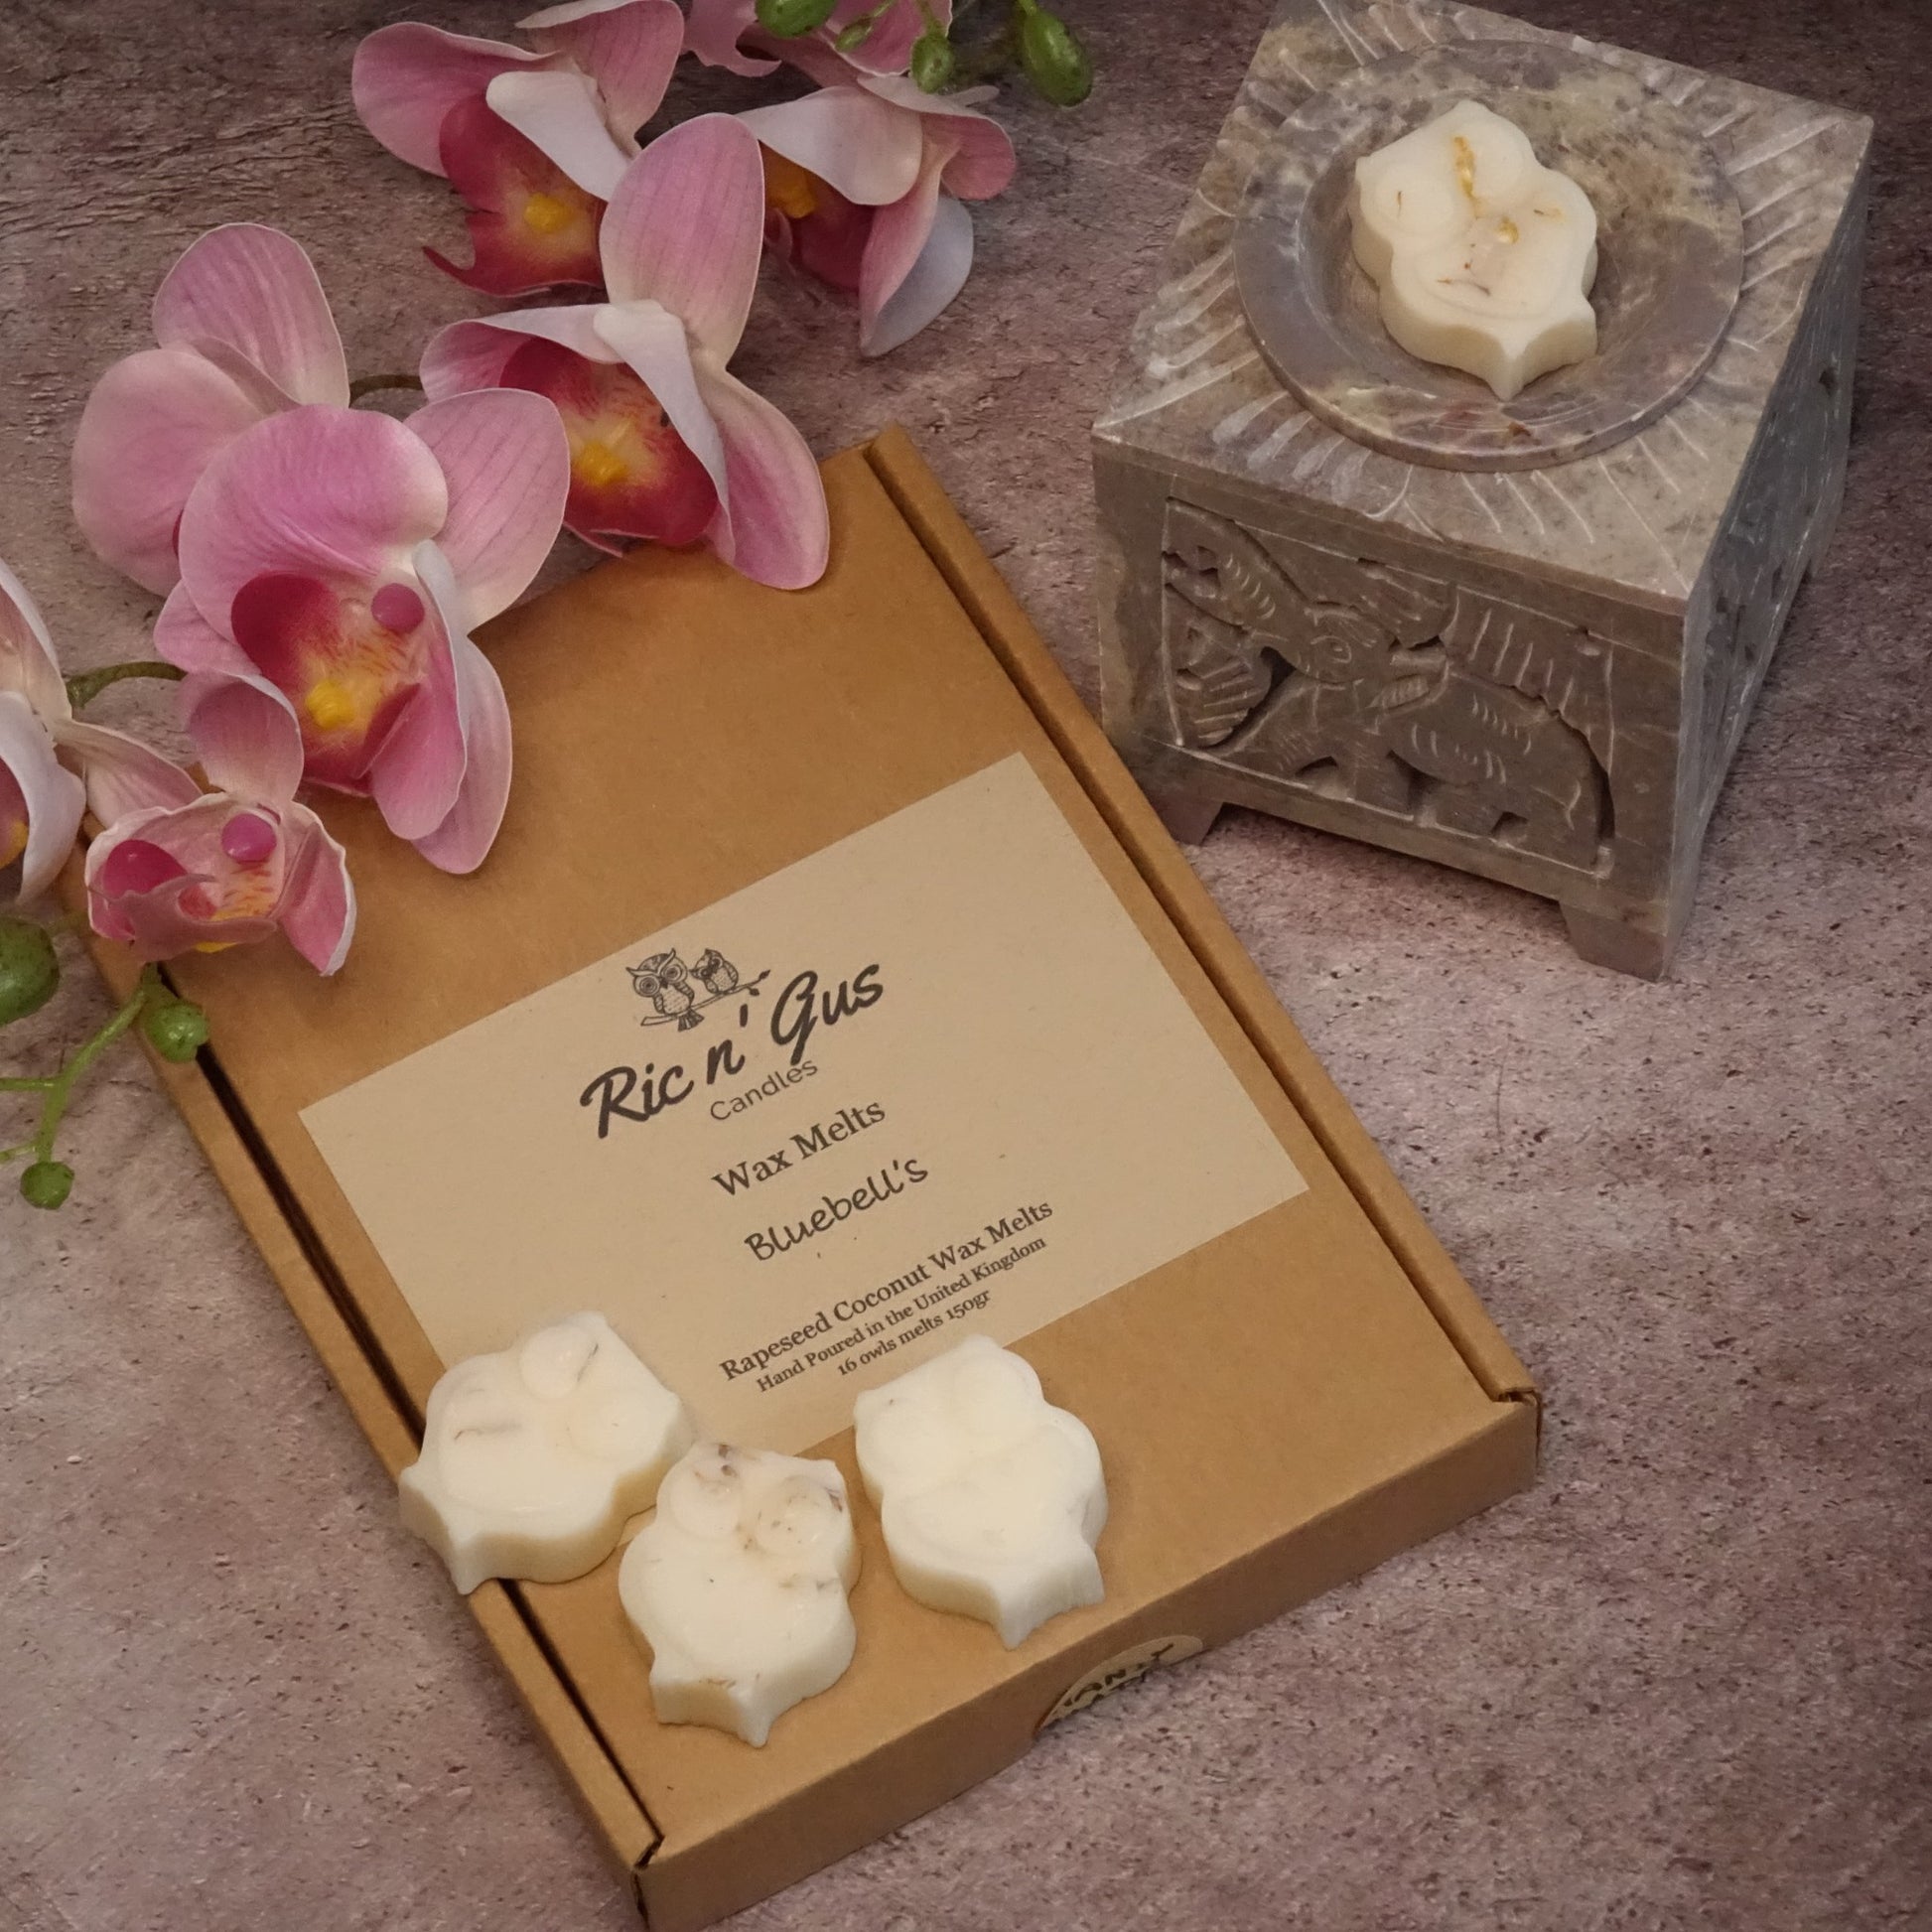 natural highly scented wax melts ric n'gus candles bluebell